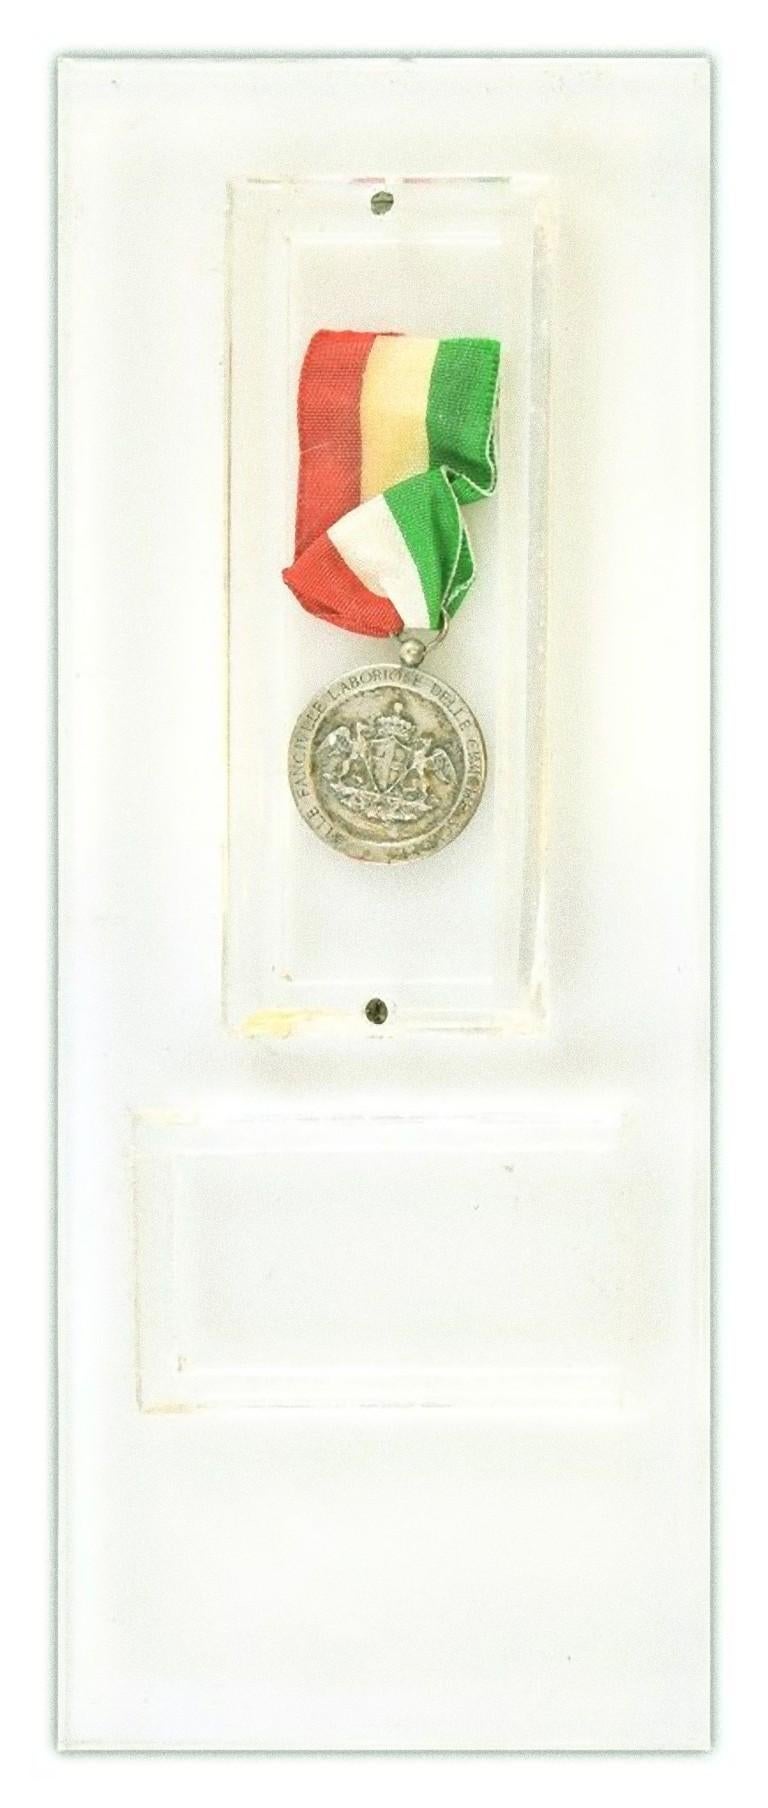 Giuseppe Garibaldi silver medal is an original silver medal realized in Italy by Italian manufacture in 1910.

This silver medal celebrates Giuseppe Garibaldi with a portrait.
On the other face a coat of arms and the wording 